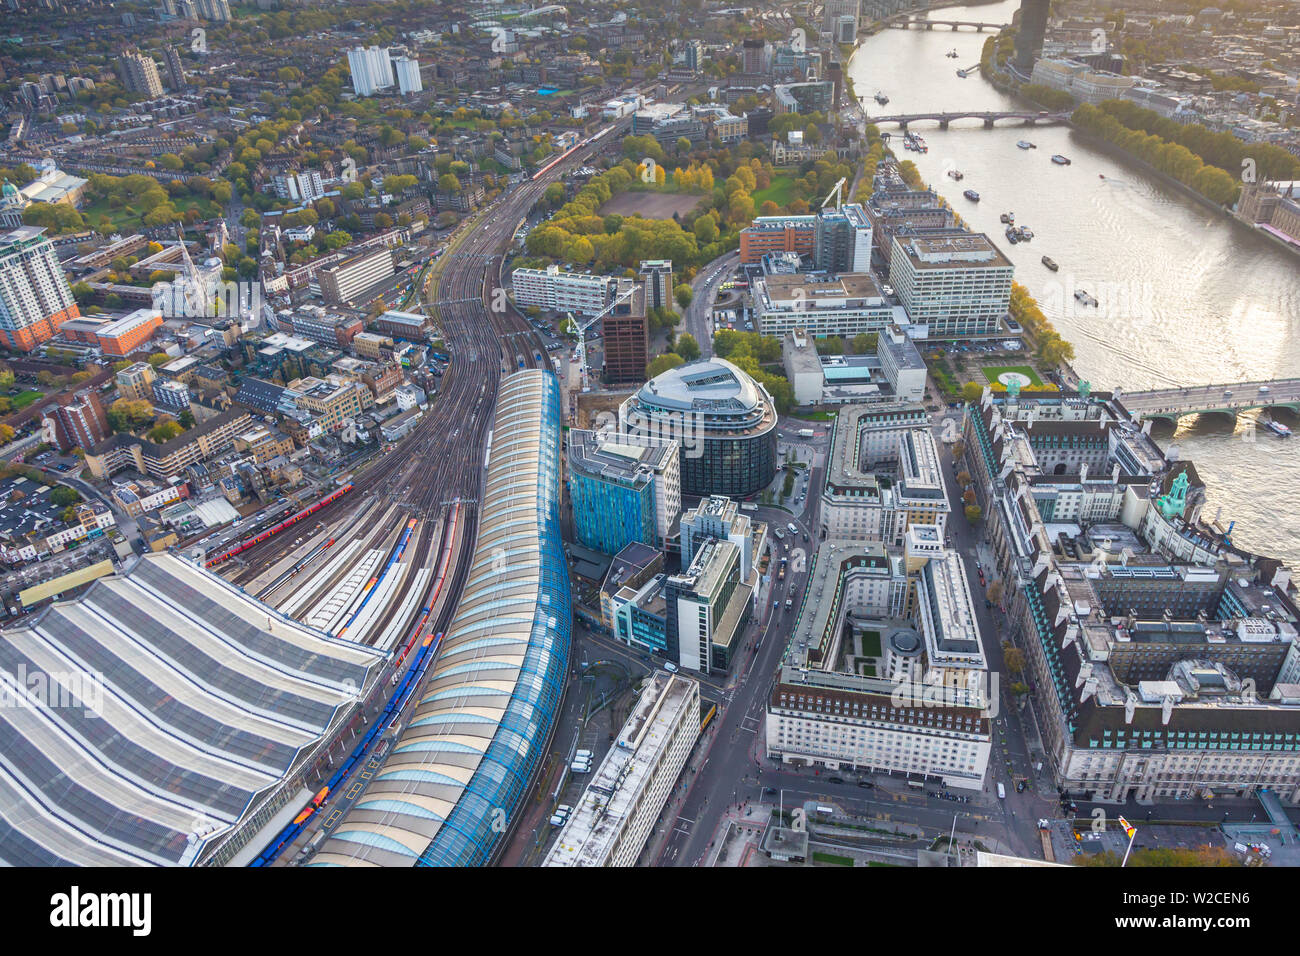 Aerial view from helicopter, Waterloo station, London, England Stock Photo